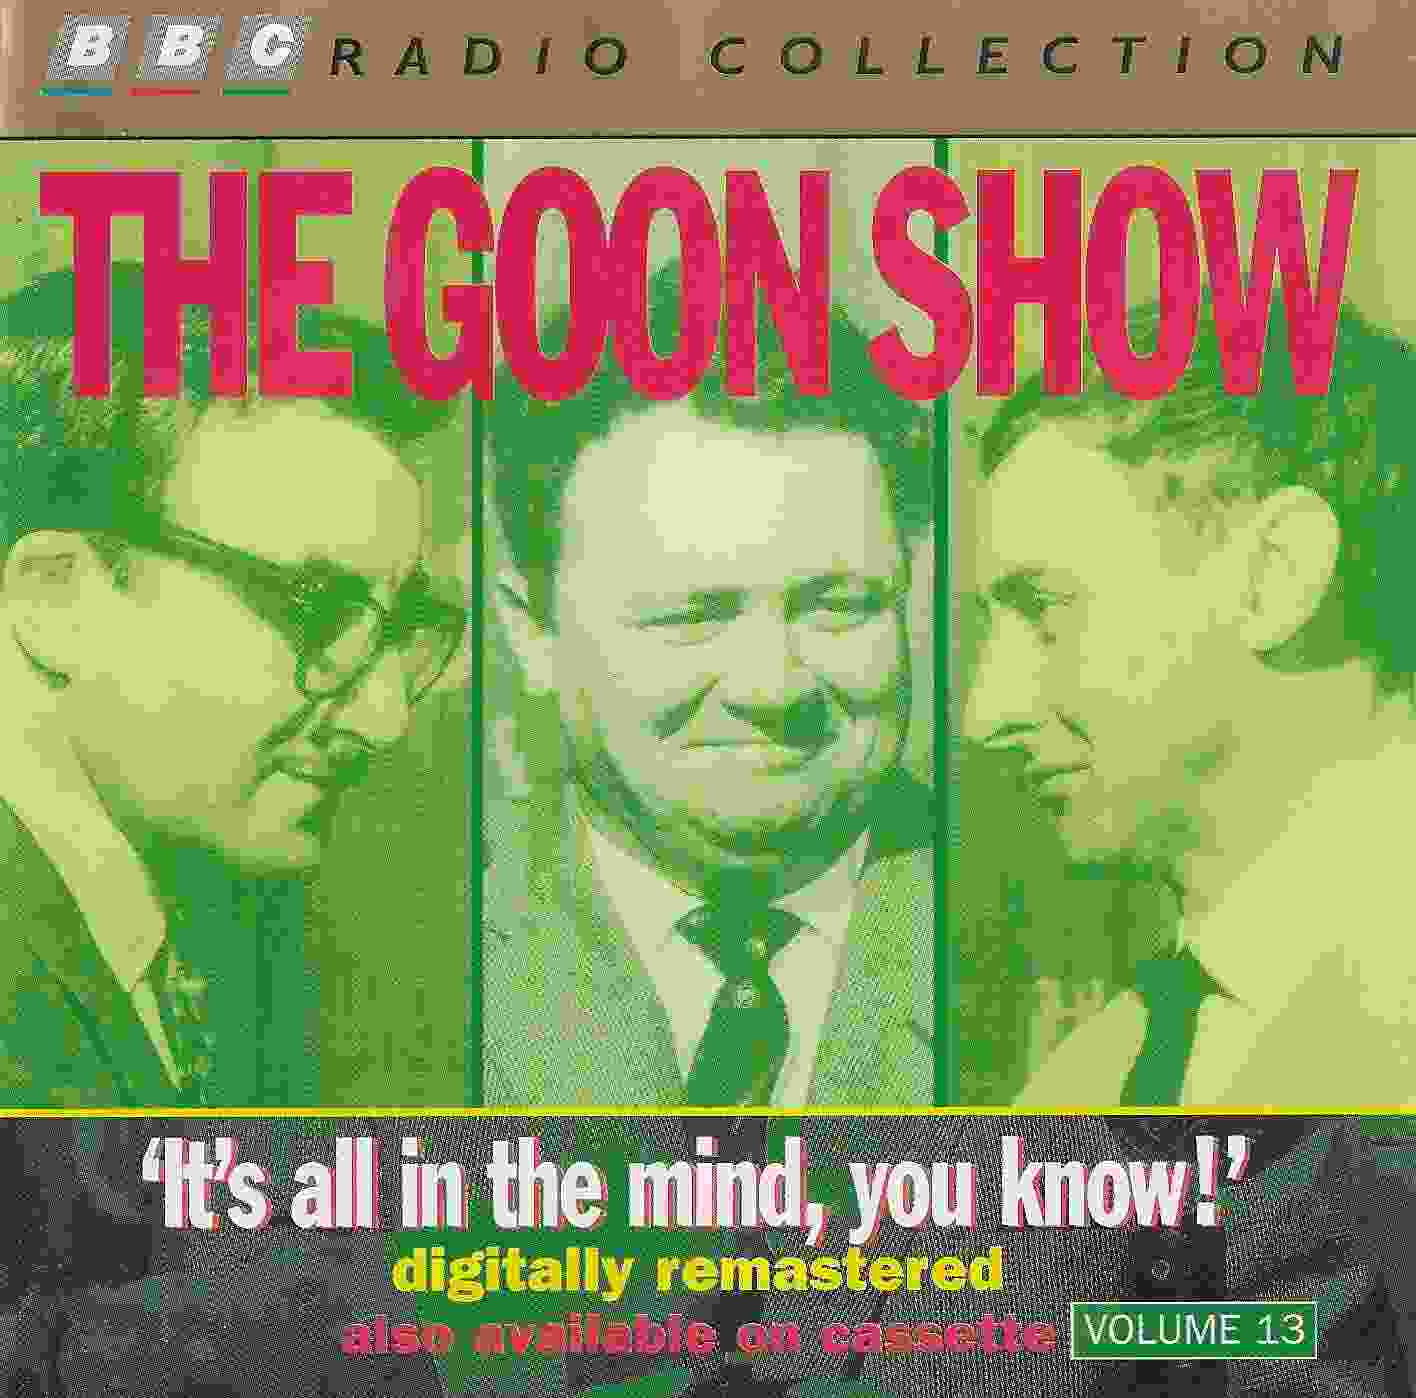 Picture of The Goon show 13 - It's all in the mind, you know! by artist Spike Milligan / Larry Stephens from the BBC cds - Records and Tapes library